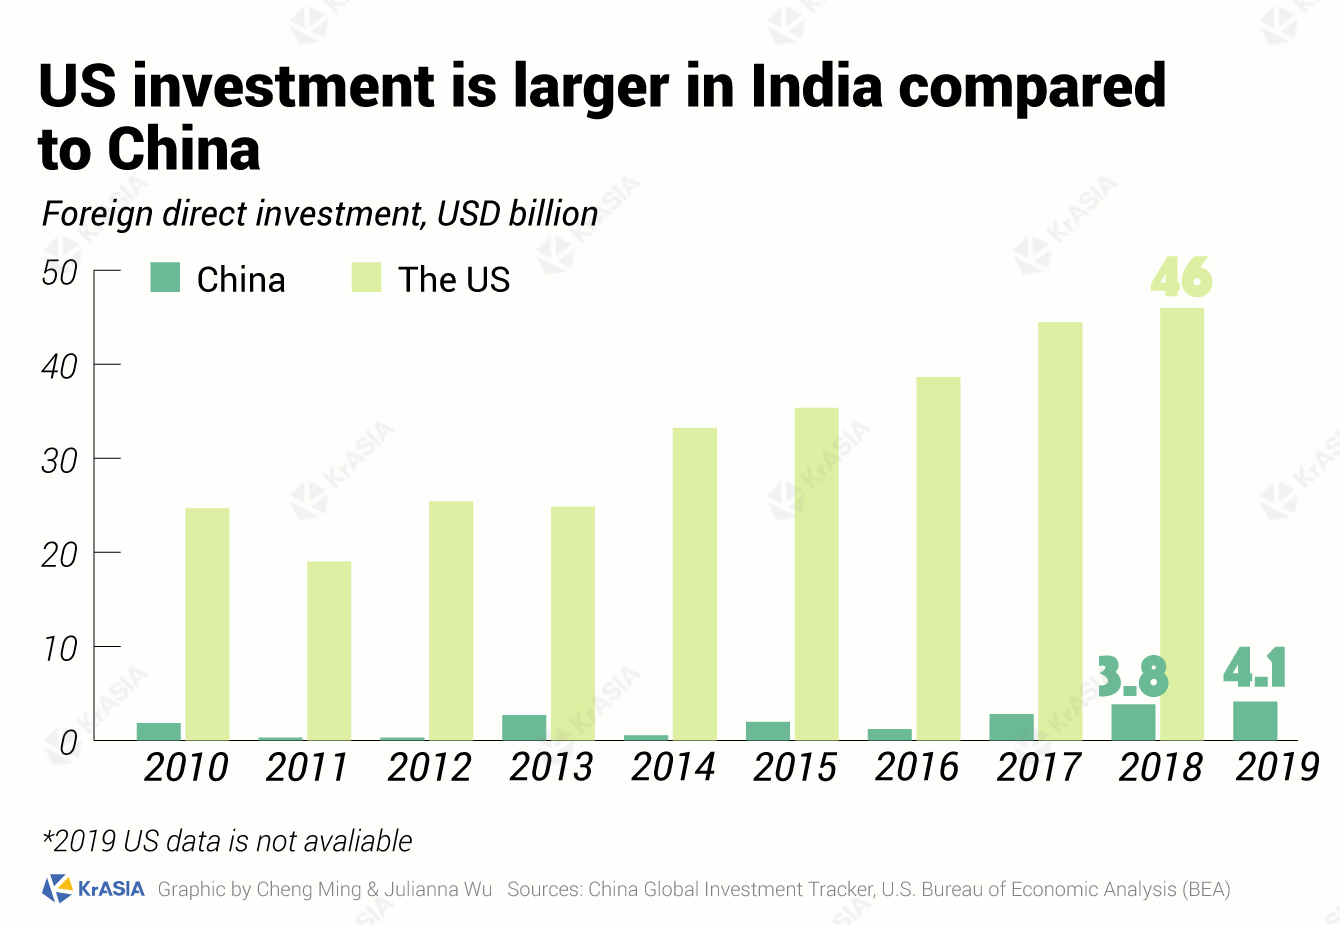 Foreign direct investment, China and the US in India